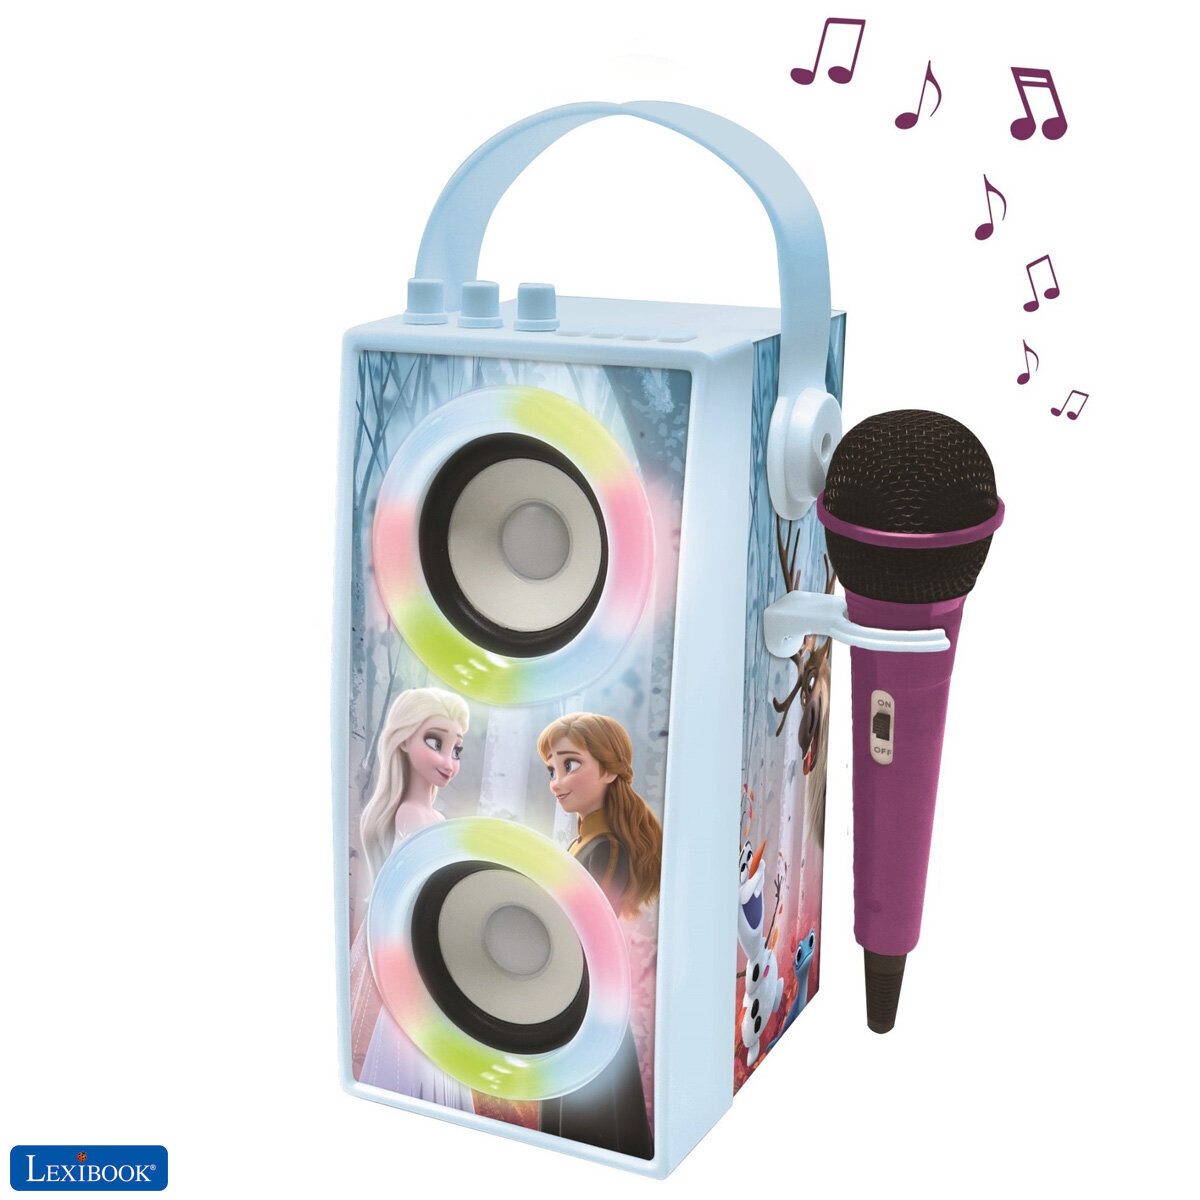 Foster parents Cornwall Distinction Lexibook - Frozen Trendy Portable Bluetooth Speaker with mic and amazing  lights effects hinta | hobbyhall.fi